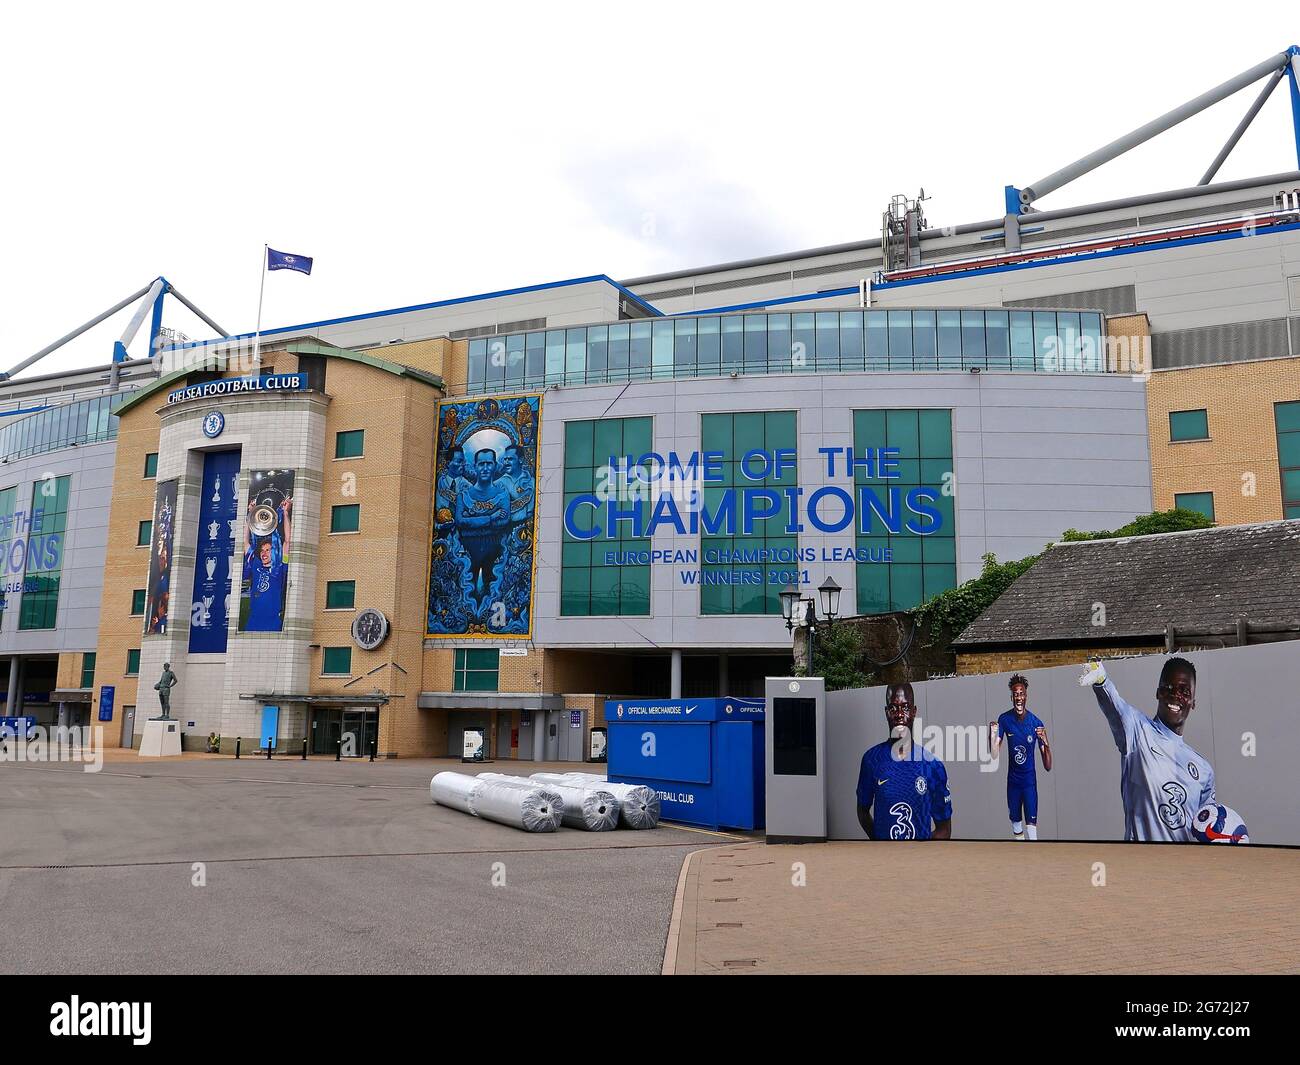 The History of Stamford Bridge Stamford Bridge is the home of Chelsea Football Club, but it hasn't always been that way and the site has quite a history.  The name 'Stamford Bridge' is one of great significance in English history, being the site in Yorkshire of one the most famous battles of King Harold's reign in 1066 against the Vikings. However it is believed that this is not connected to the naming of the stadium which came about less because of historical significance and more to do with it's geography, local landmarks and a fair degree of chance. Stock Photo